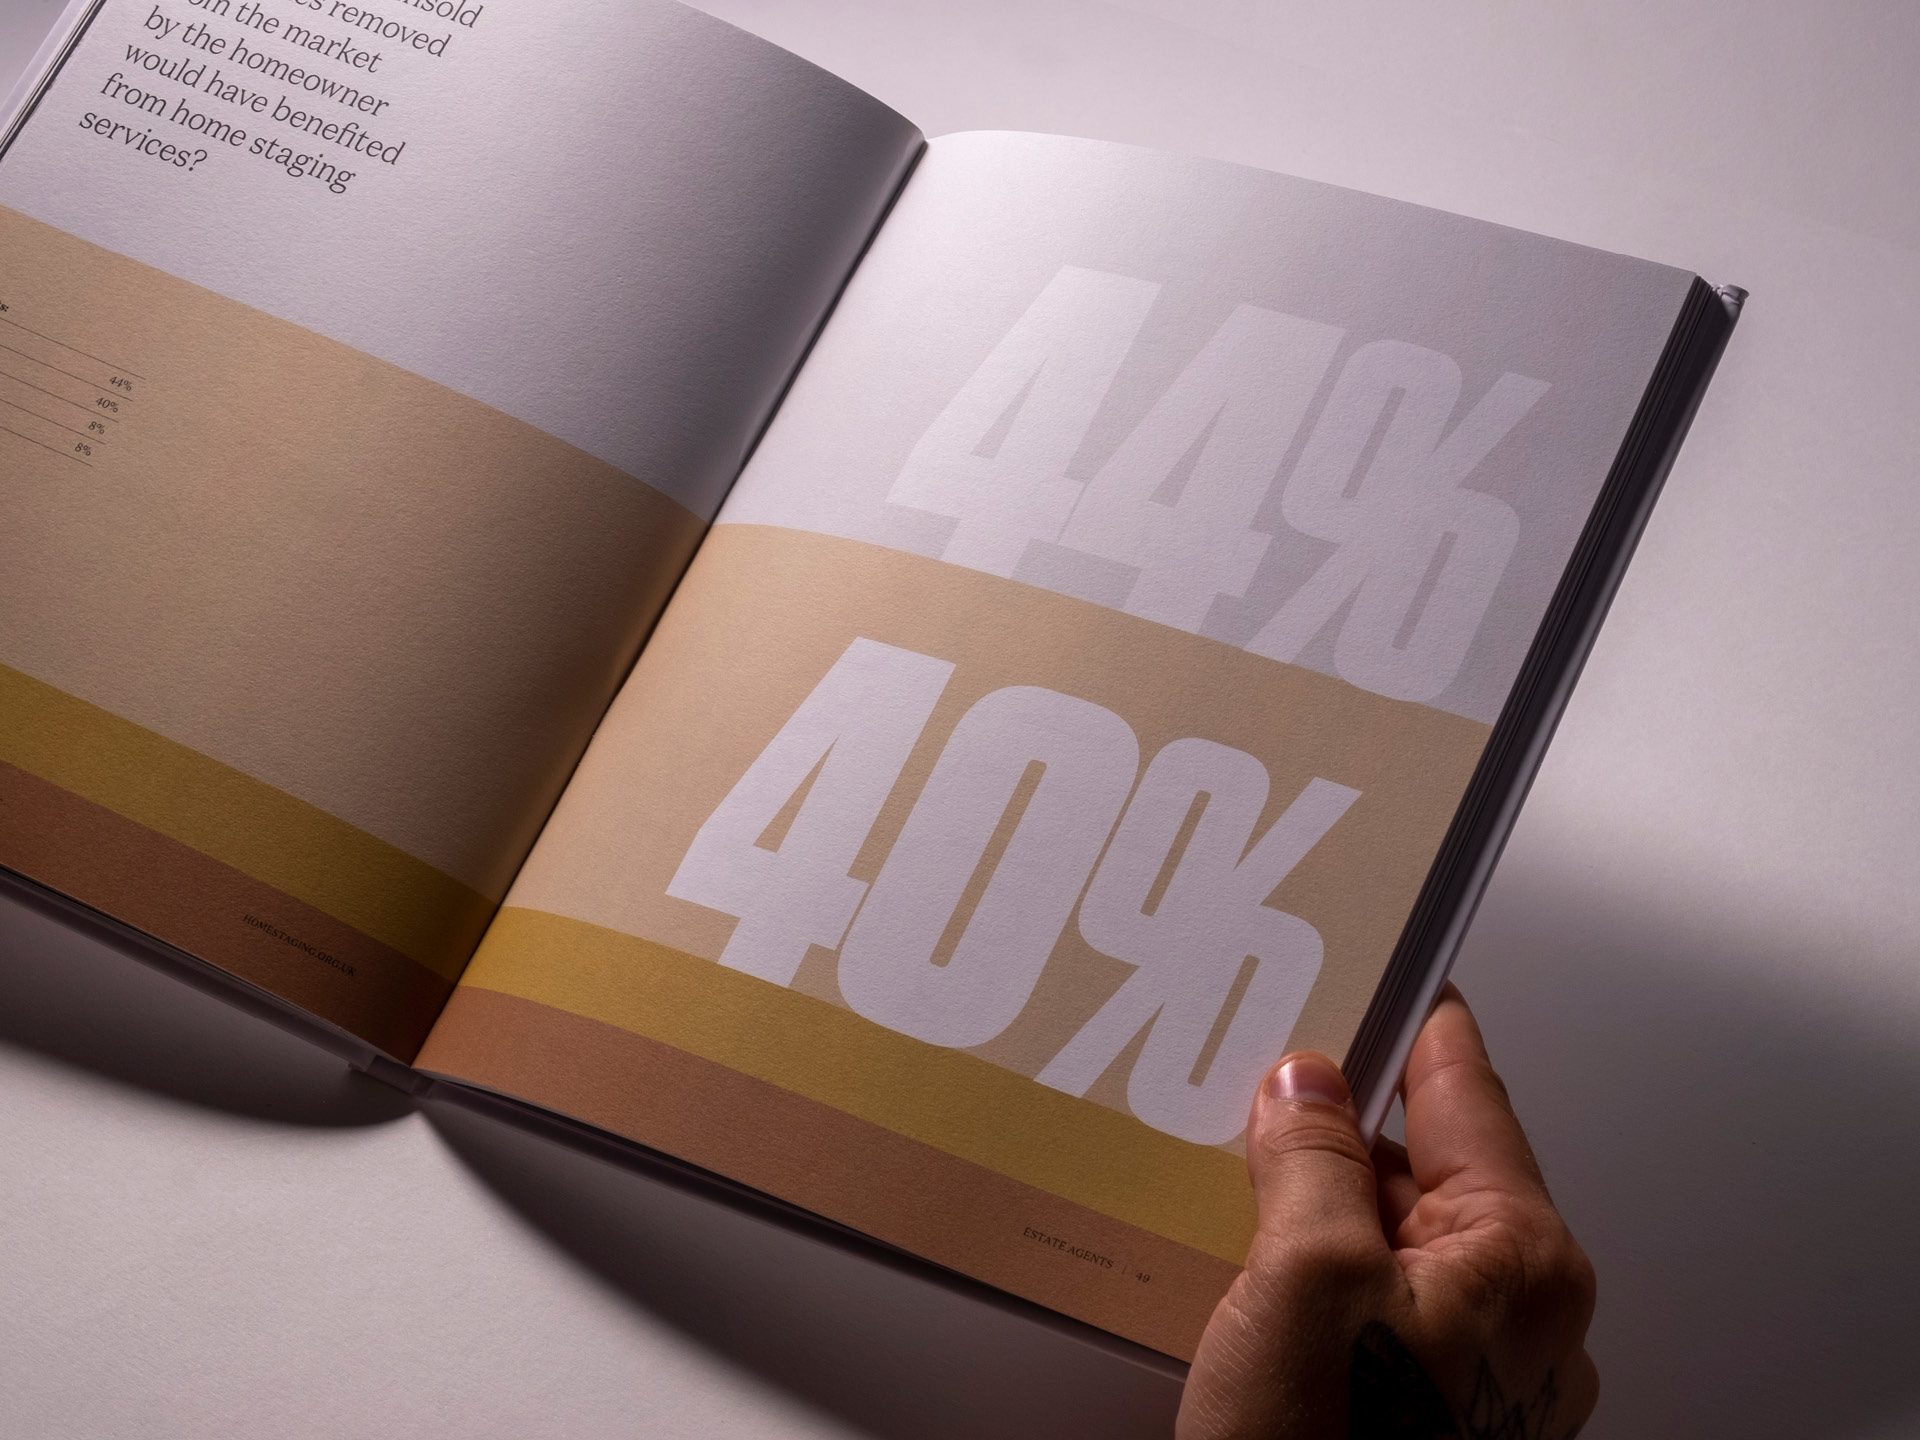 A large double spread infographic using the proportions of the page as a visual representation of the percentages